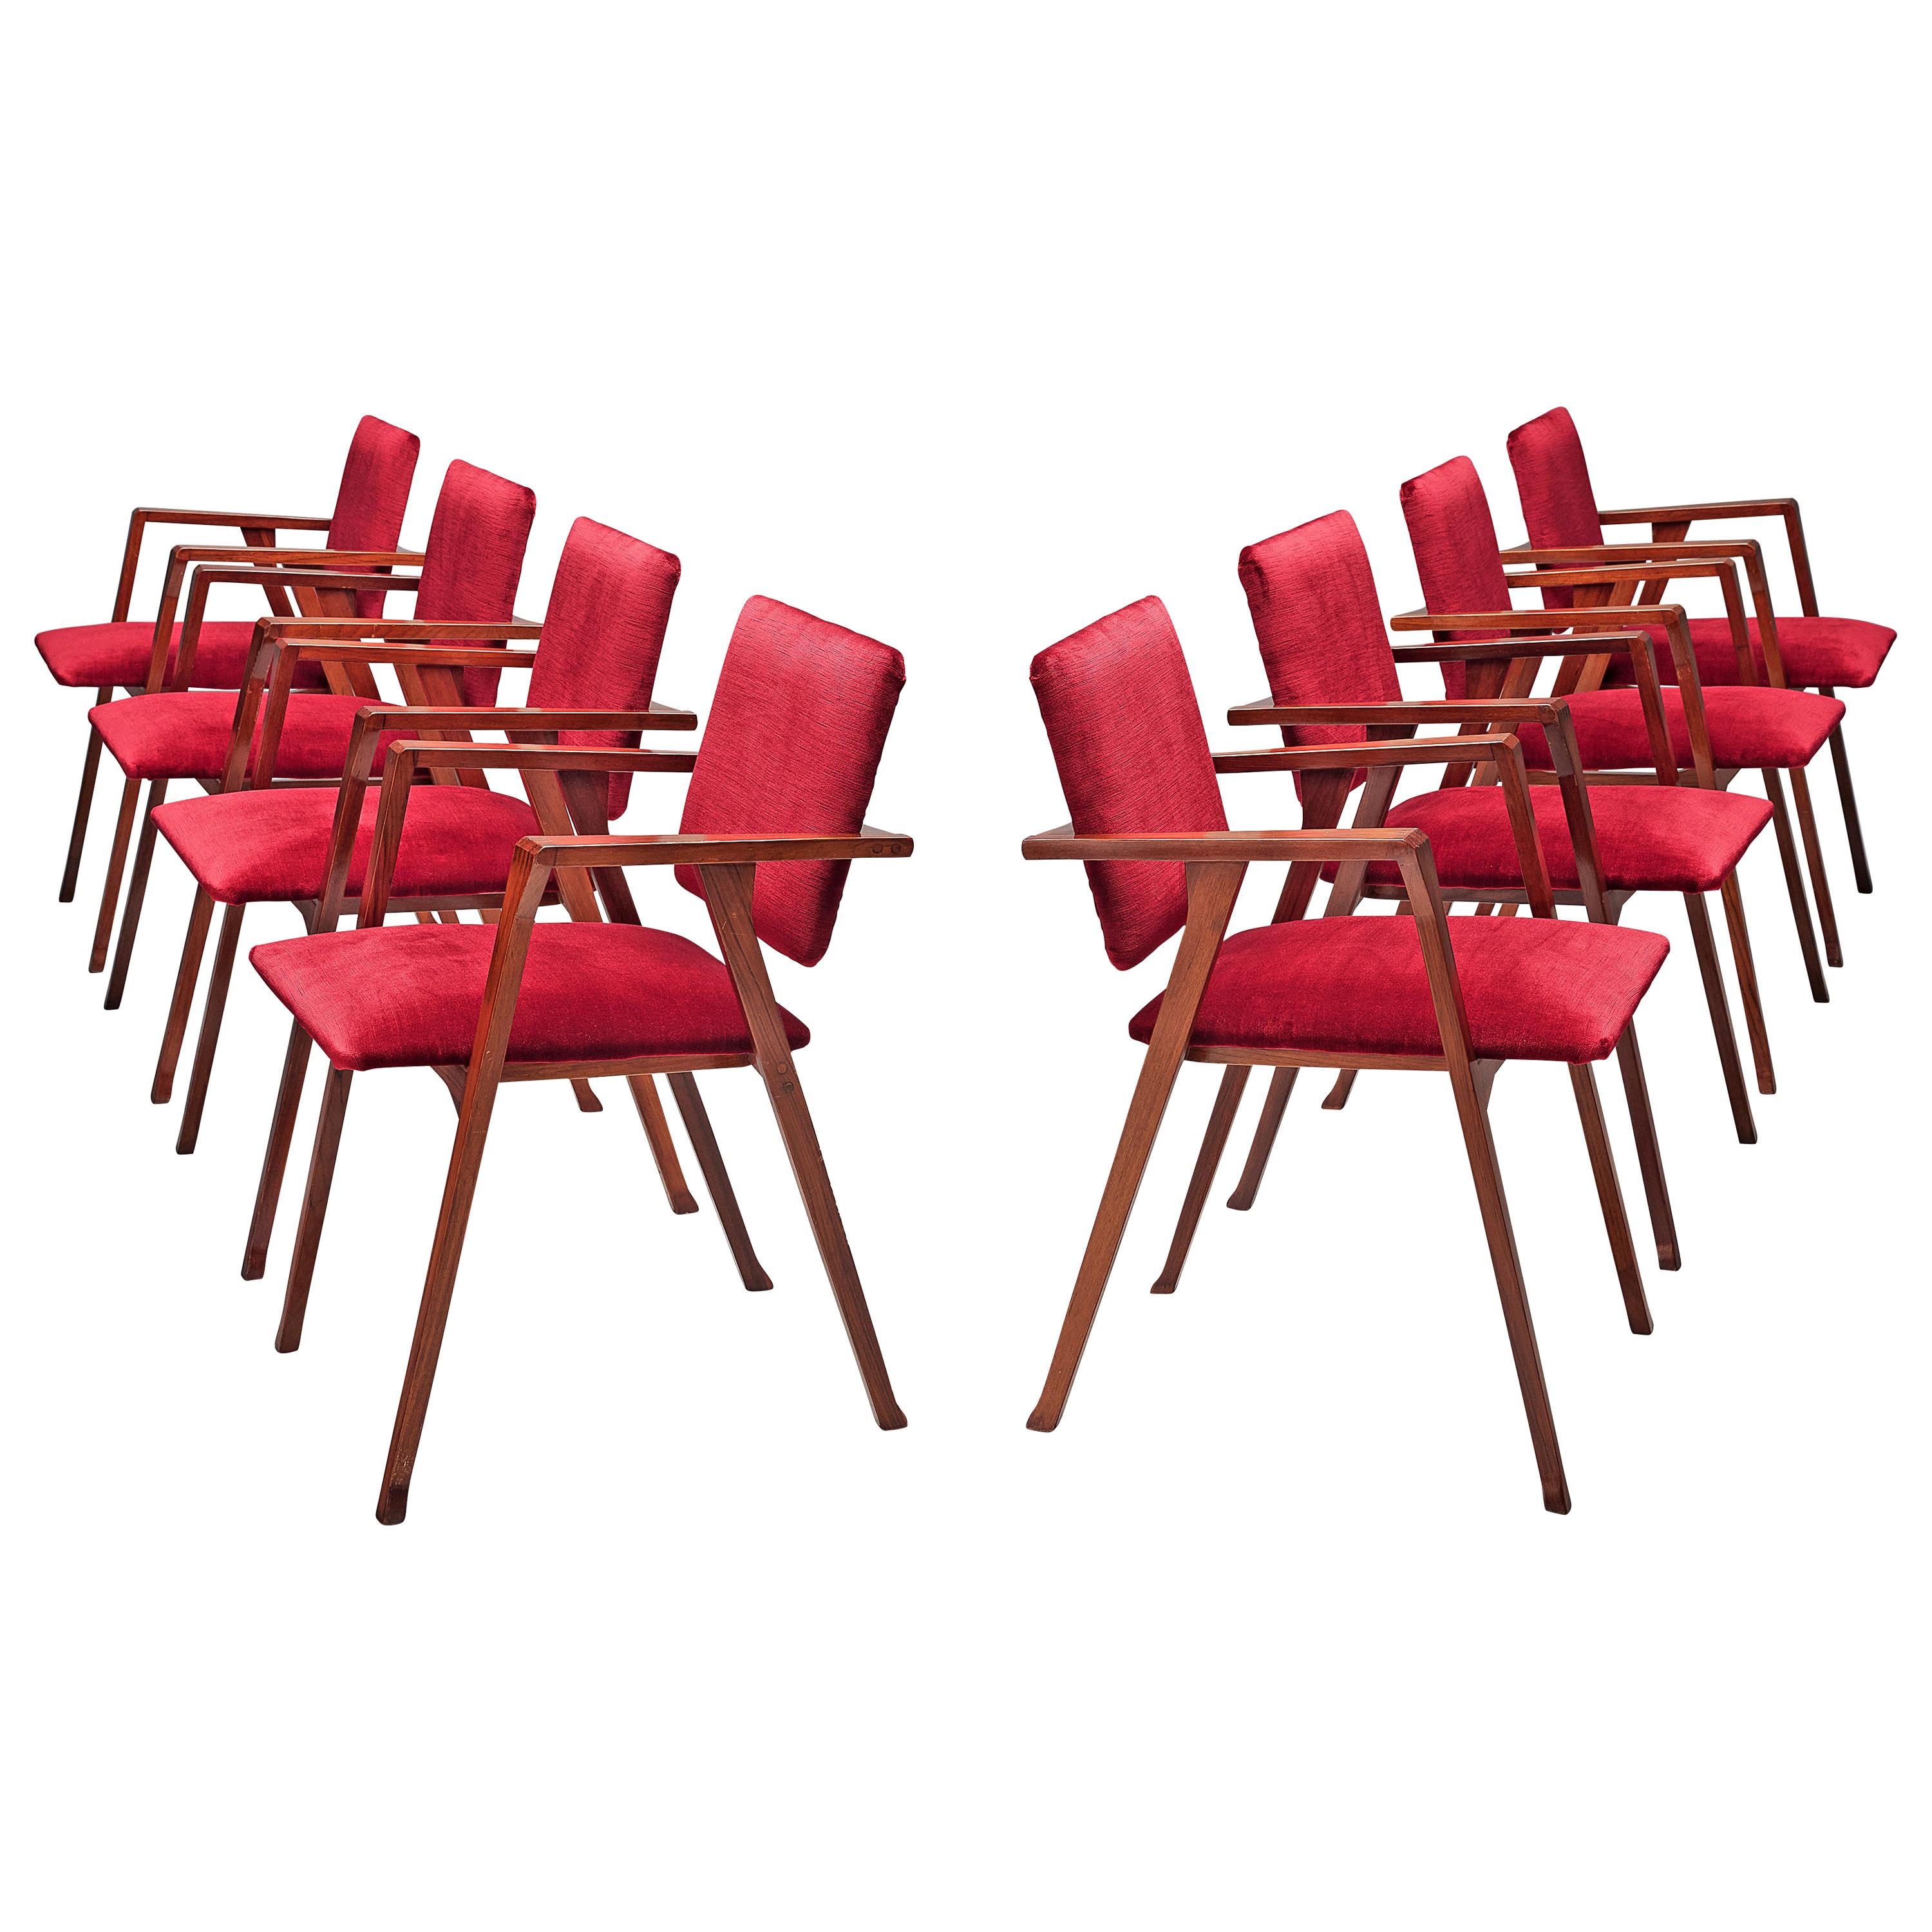 Franco Albini Set of Eight 'Luisa' Dining Chairs in Red Upholstery